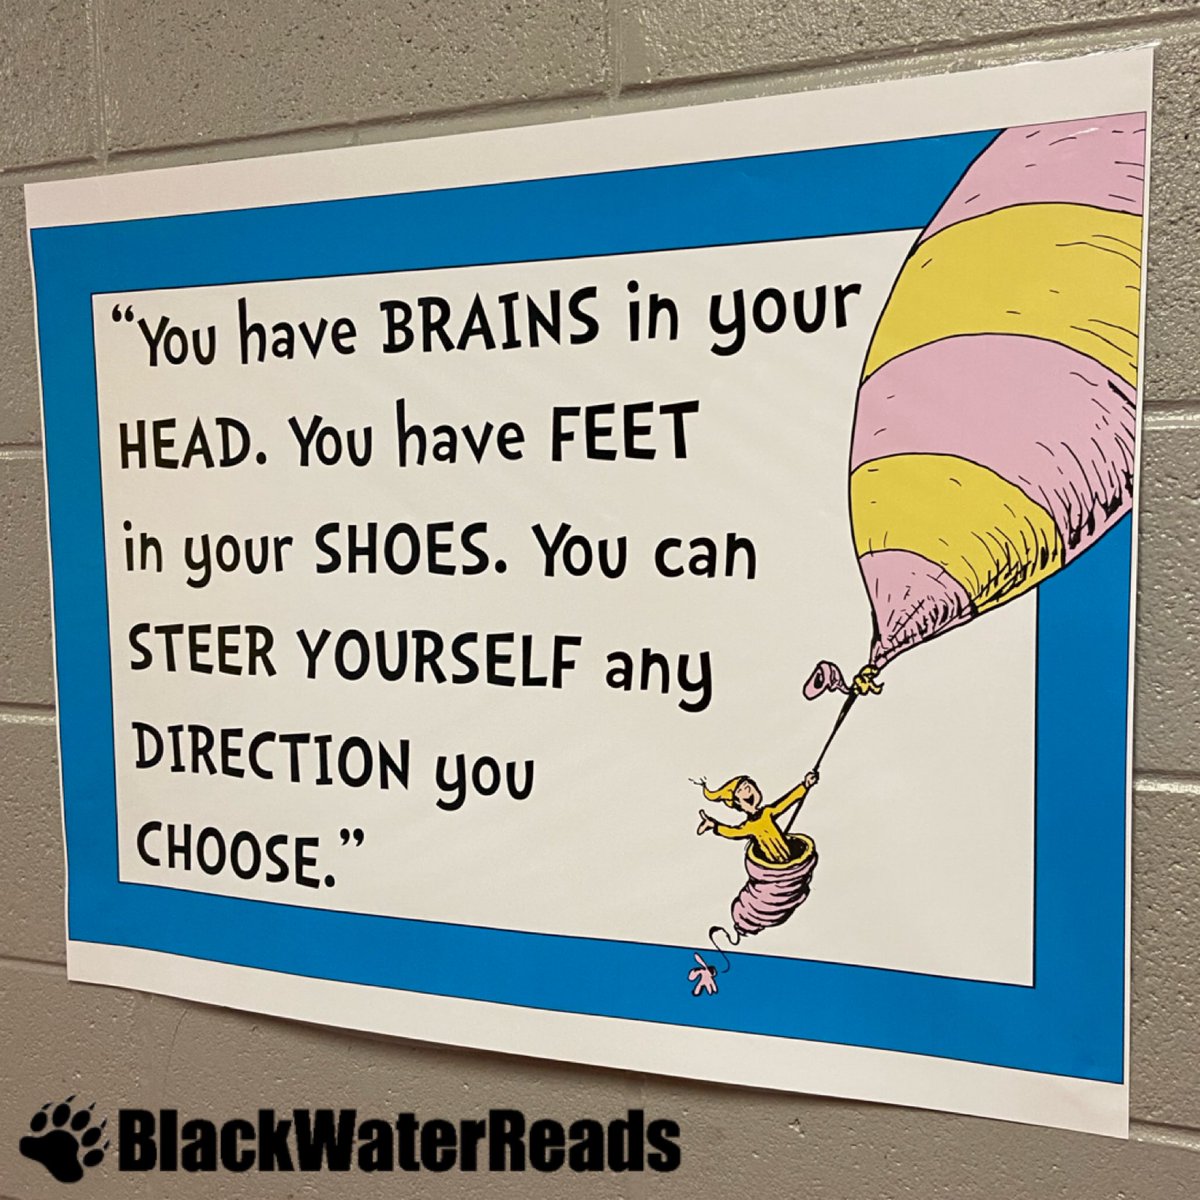 We posted these Dr. Seuss quotes around the school to celebrate Read Across America day! #blackwaterreads #blackwatermiddleexperience #drseuss #drseussquotes #hcslibrarymedia #leadhcs #leadhcsmiddle